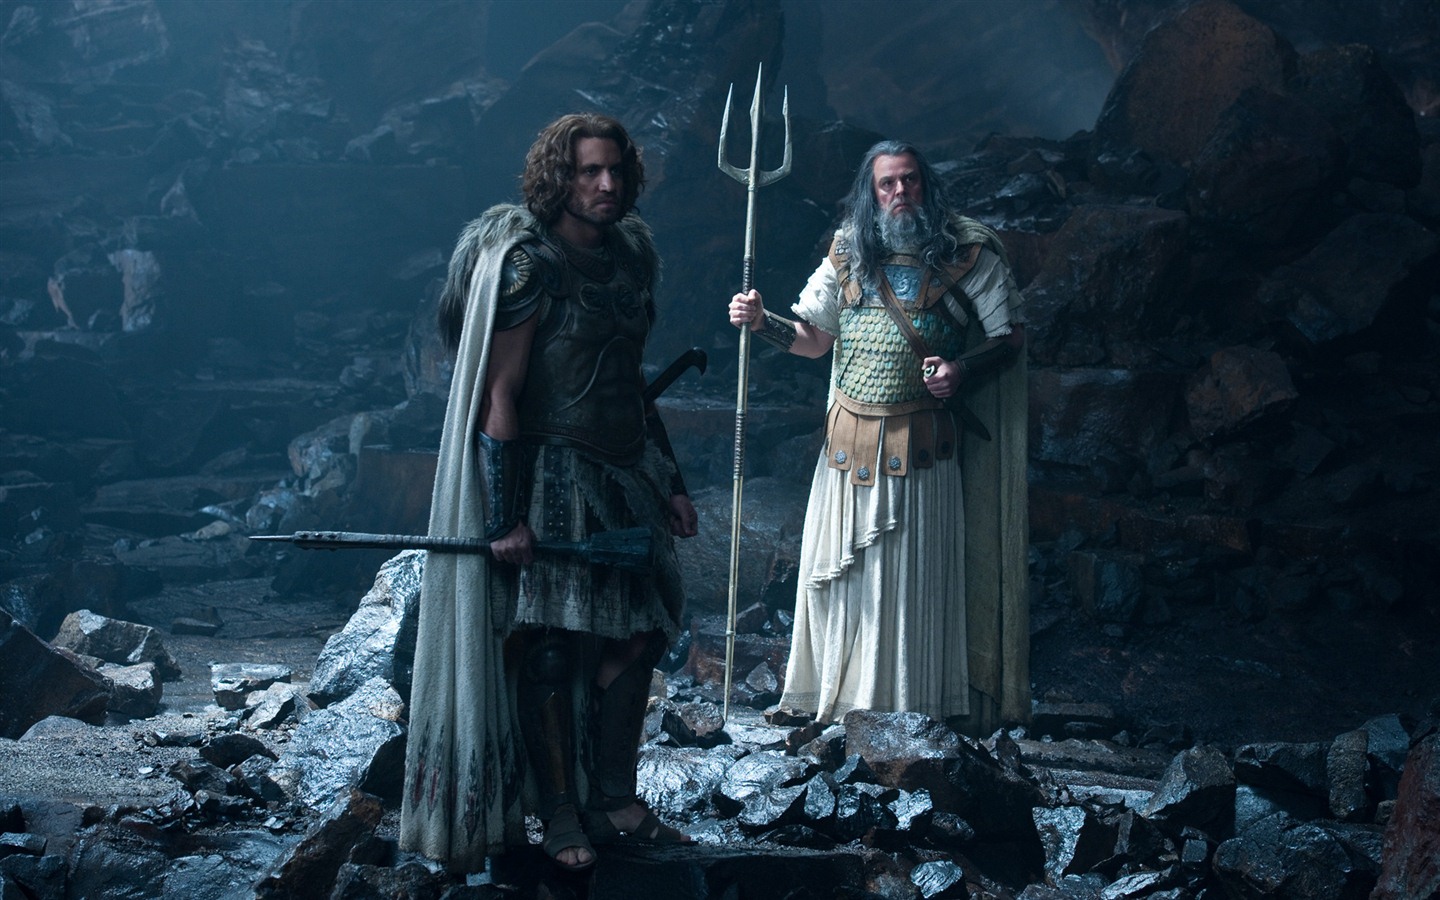 Wrath of the Titans HD Wallpapers #2 - 1440x900